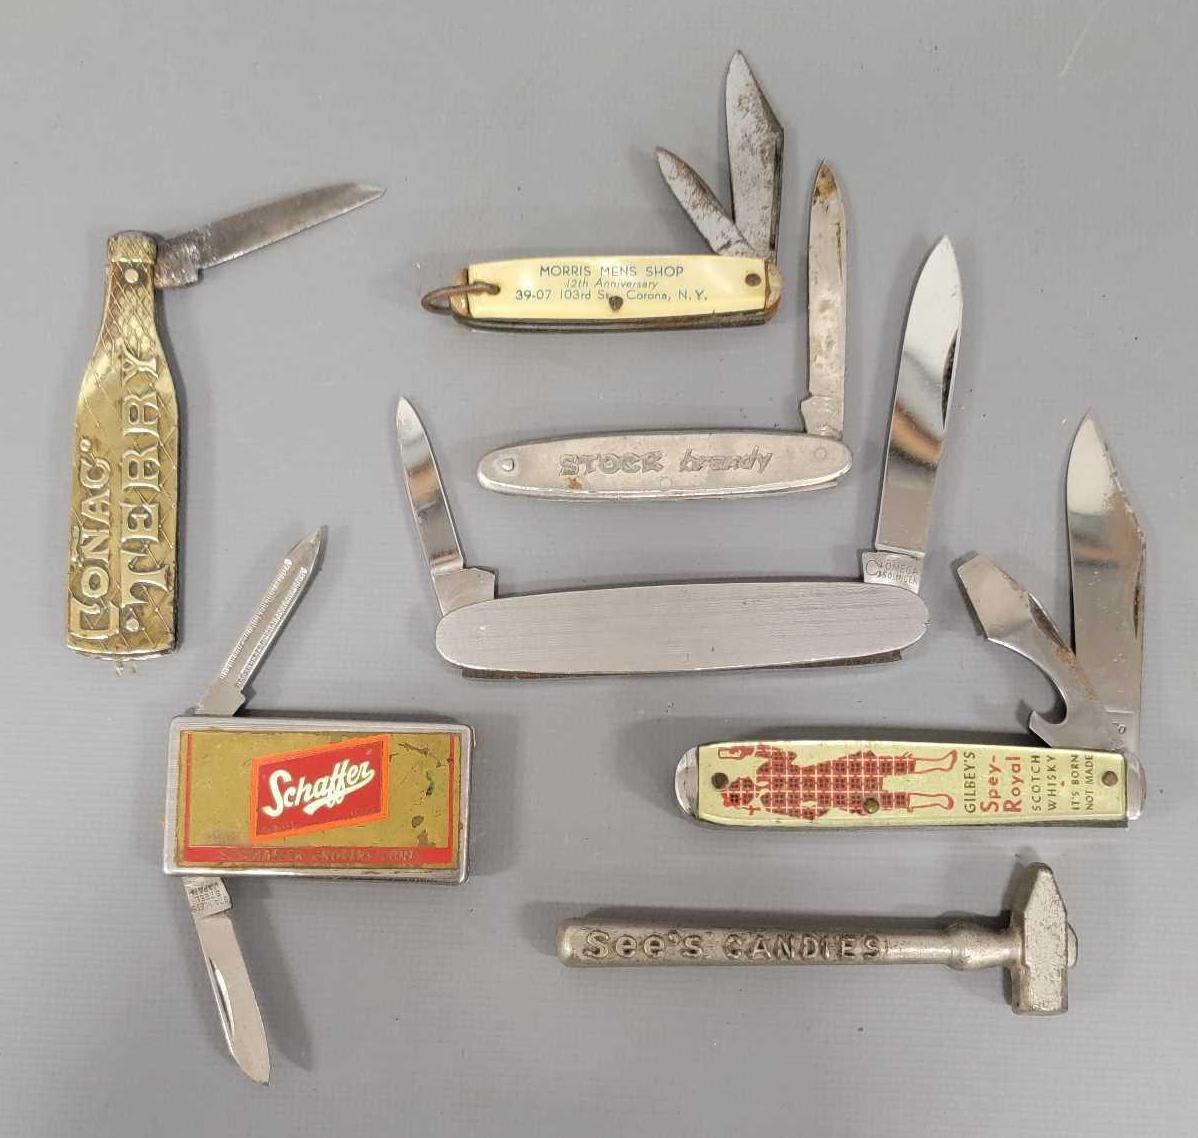 Group of six old advertising pocket knives and a tiny sledge